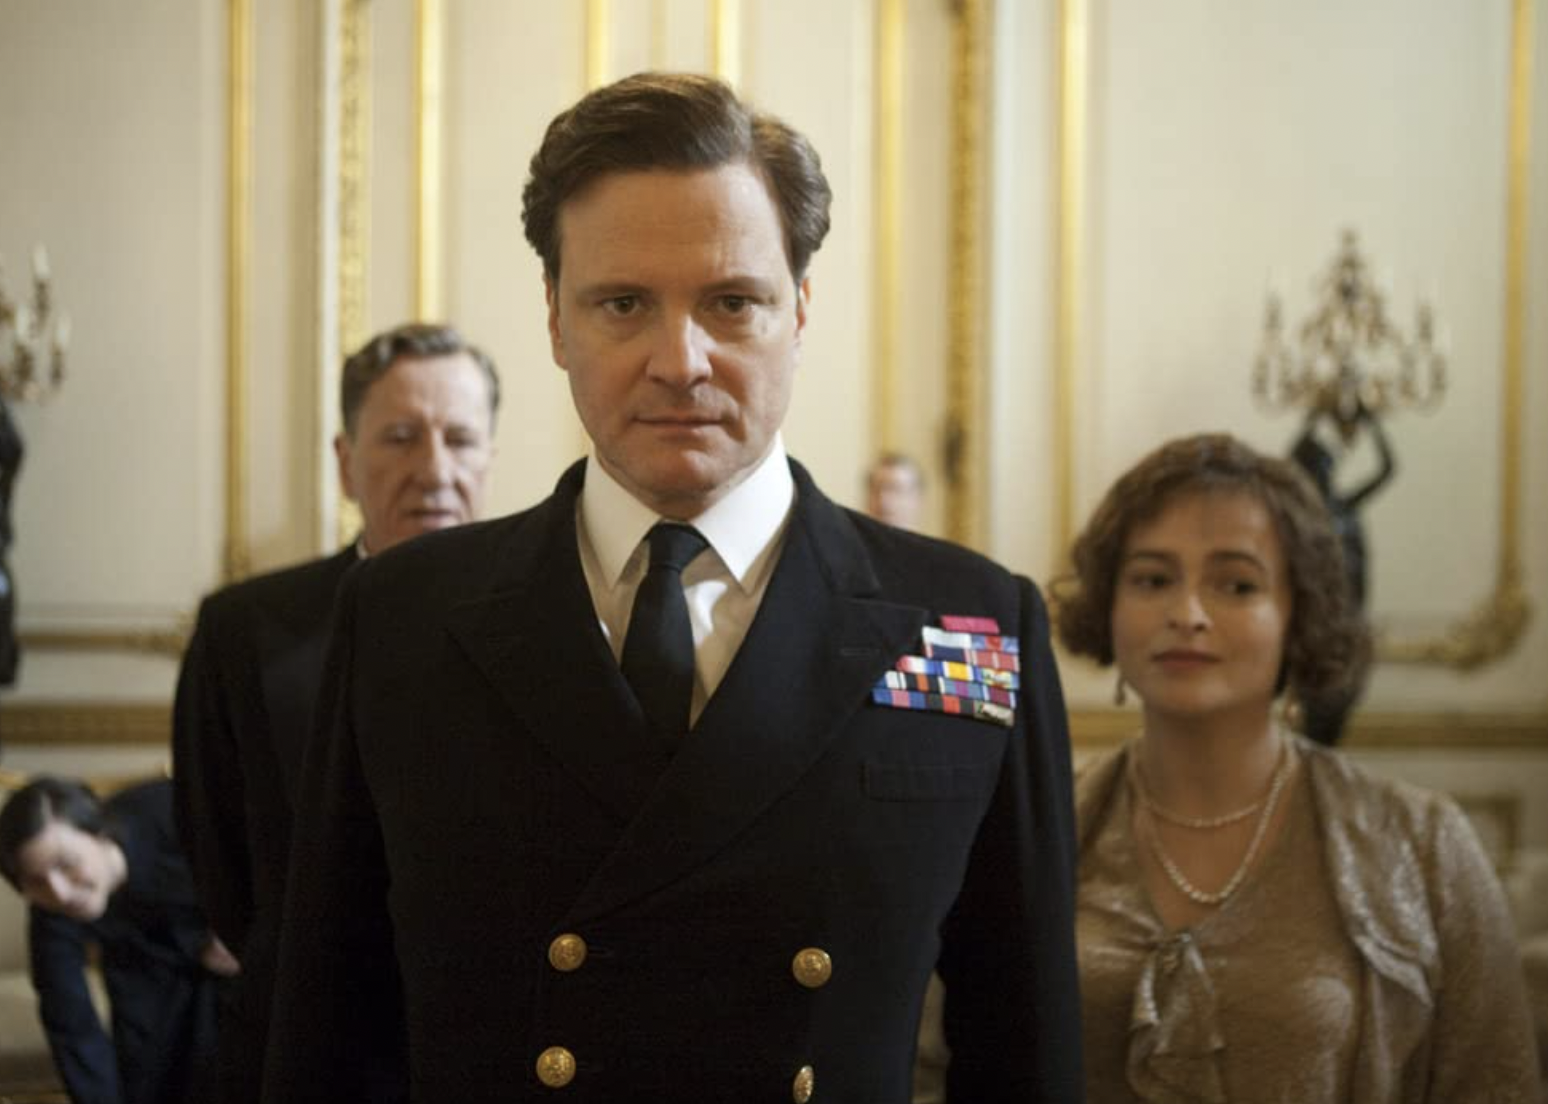 Colin Firth, Helena Bonham Carter, and Geoffrey Rush in "The King's Speech"